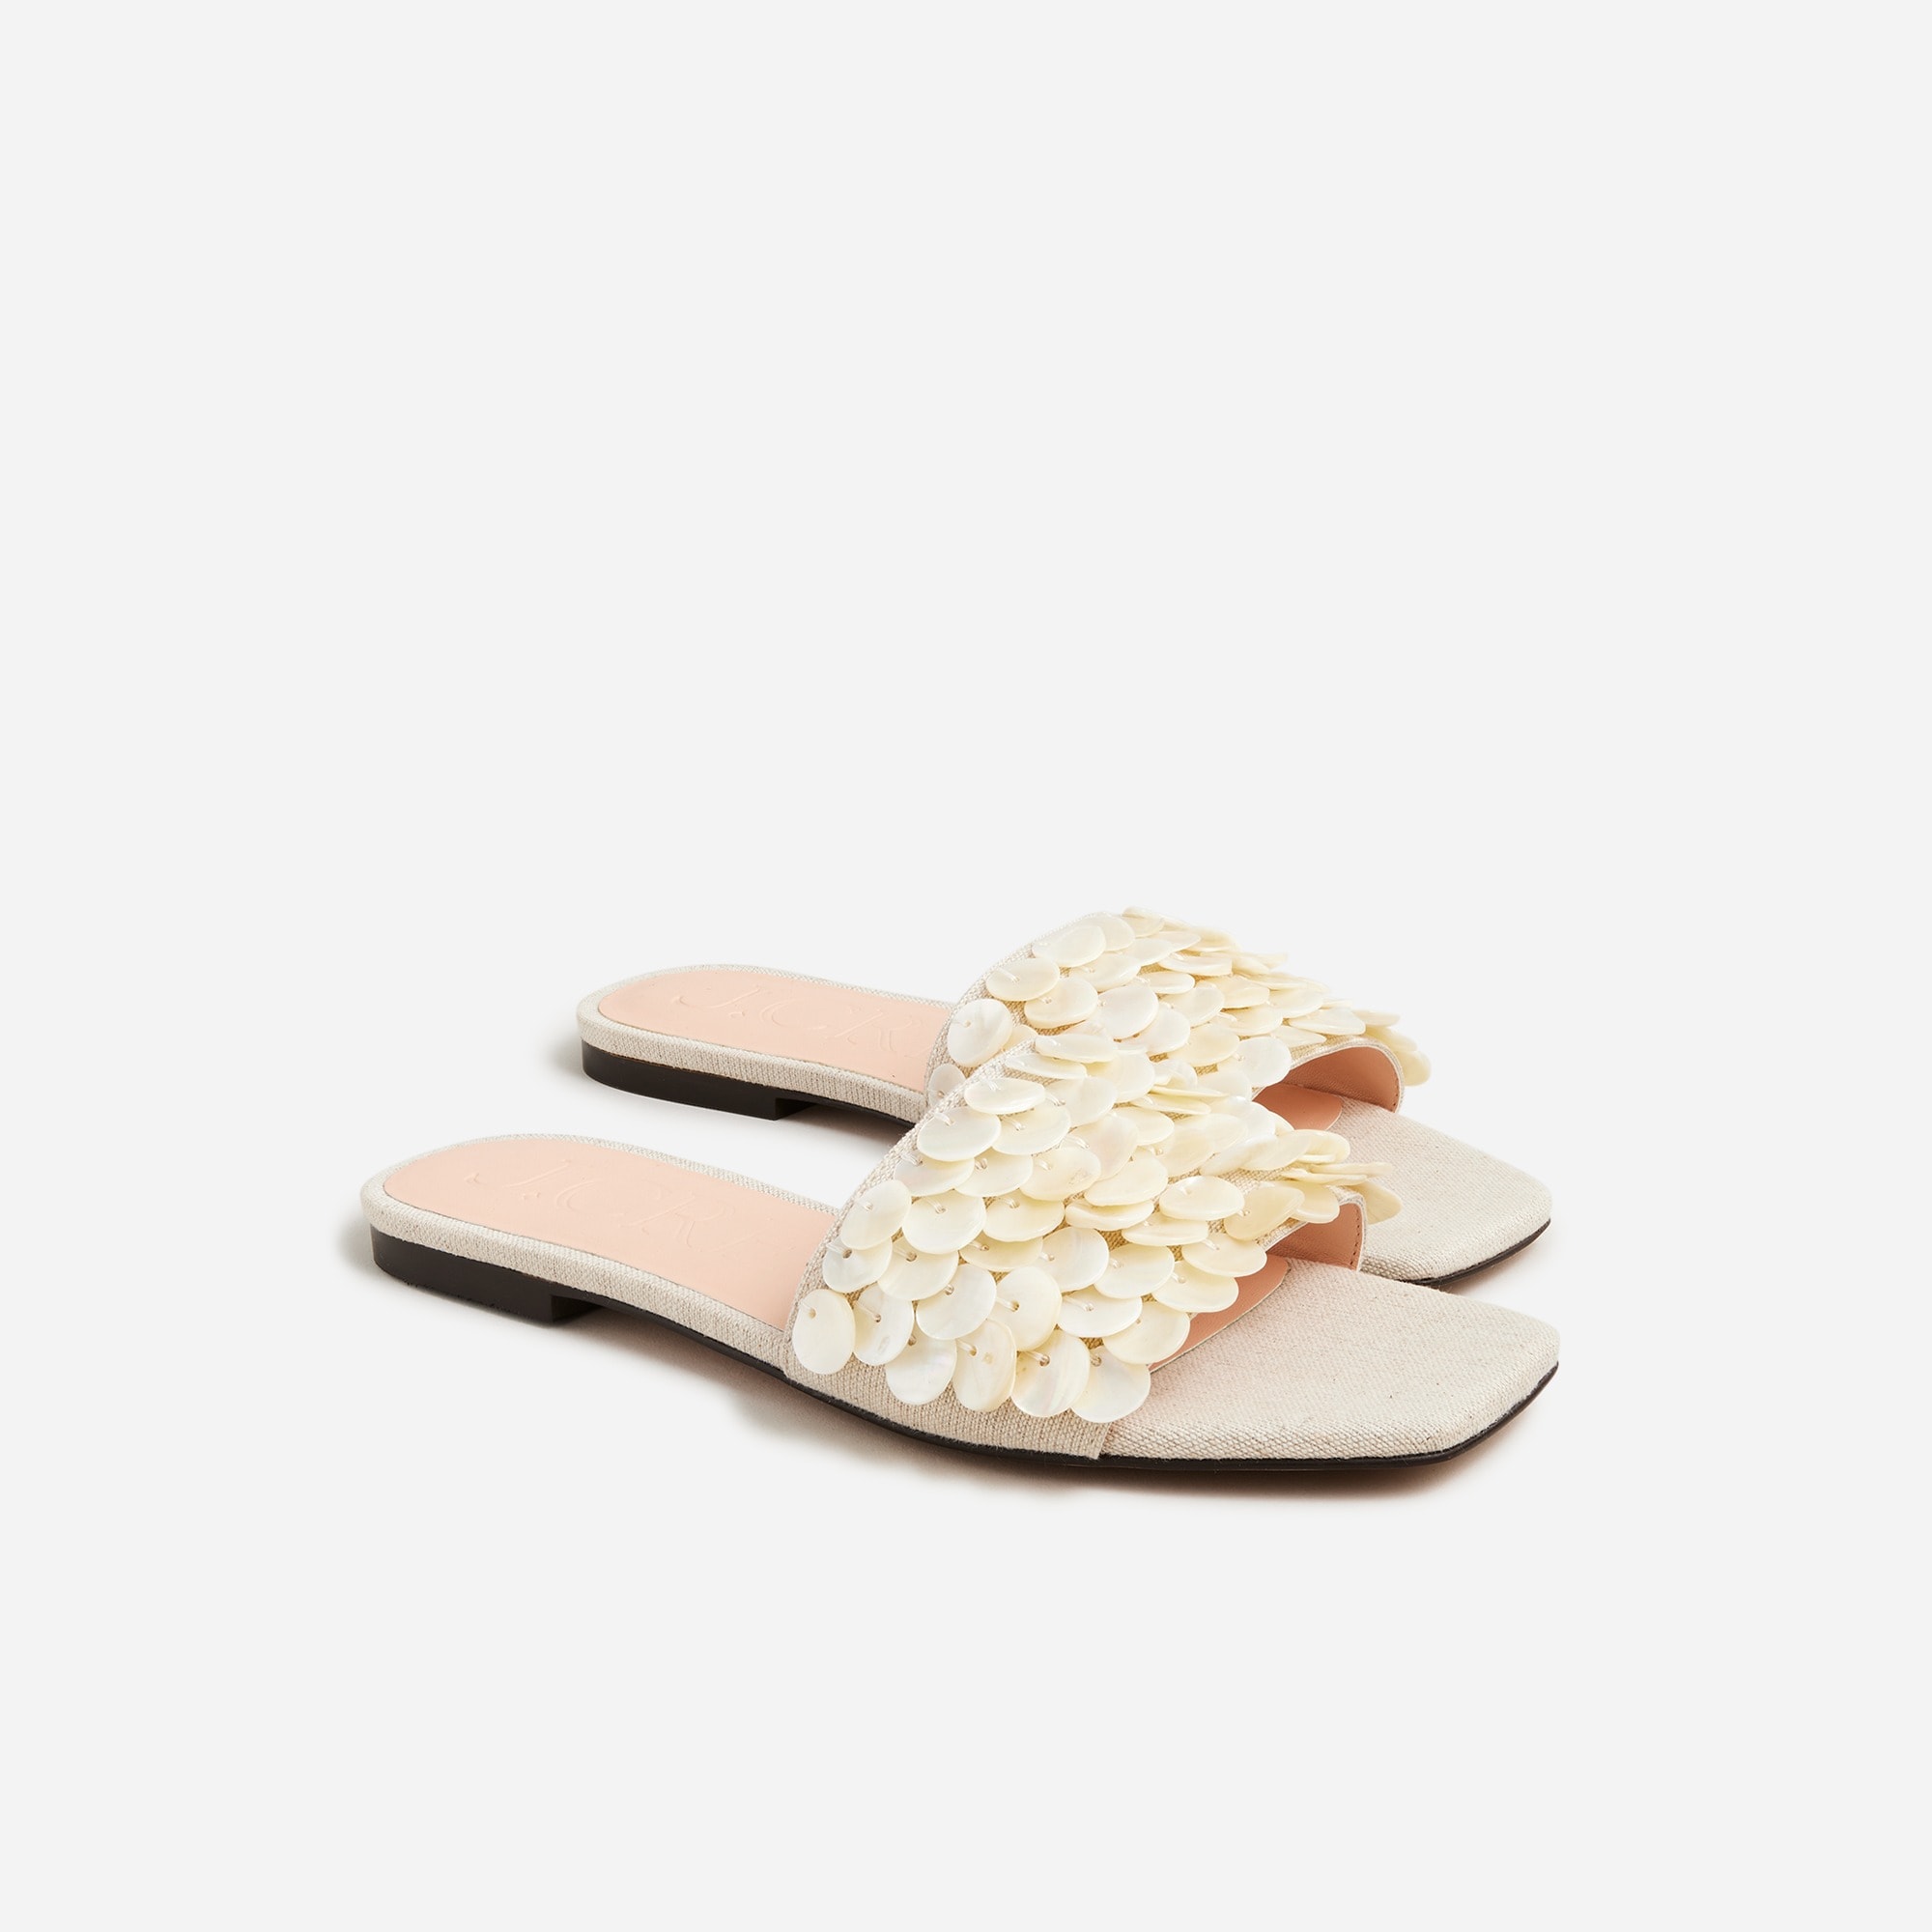  New Capri slide sandals with mother-of-pearl paillettes